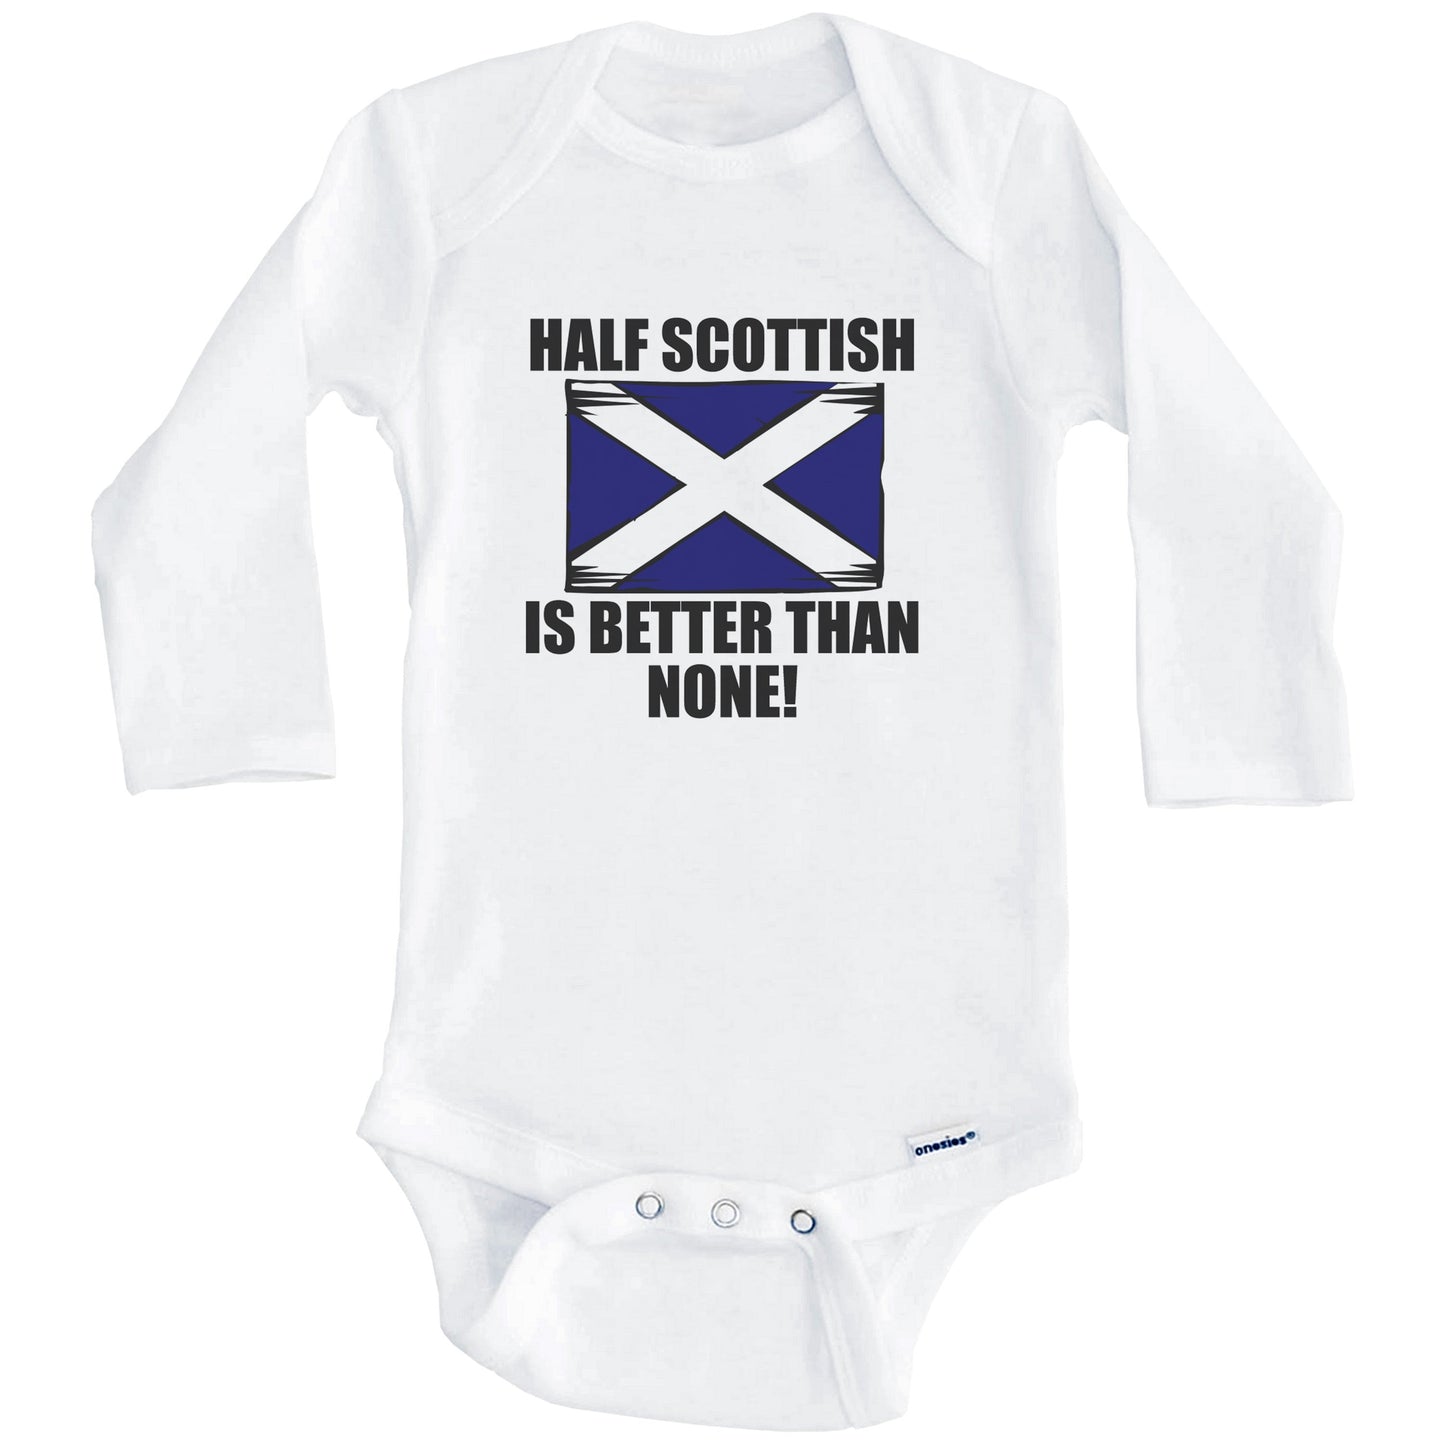 Half Scottish Is Better Than None Baby Onesie (Long Sleeves)